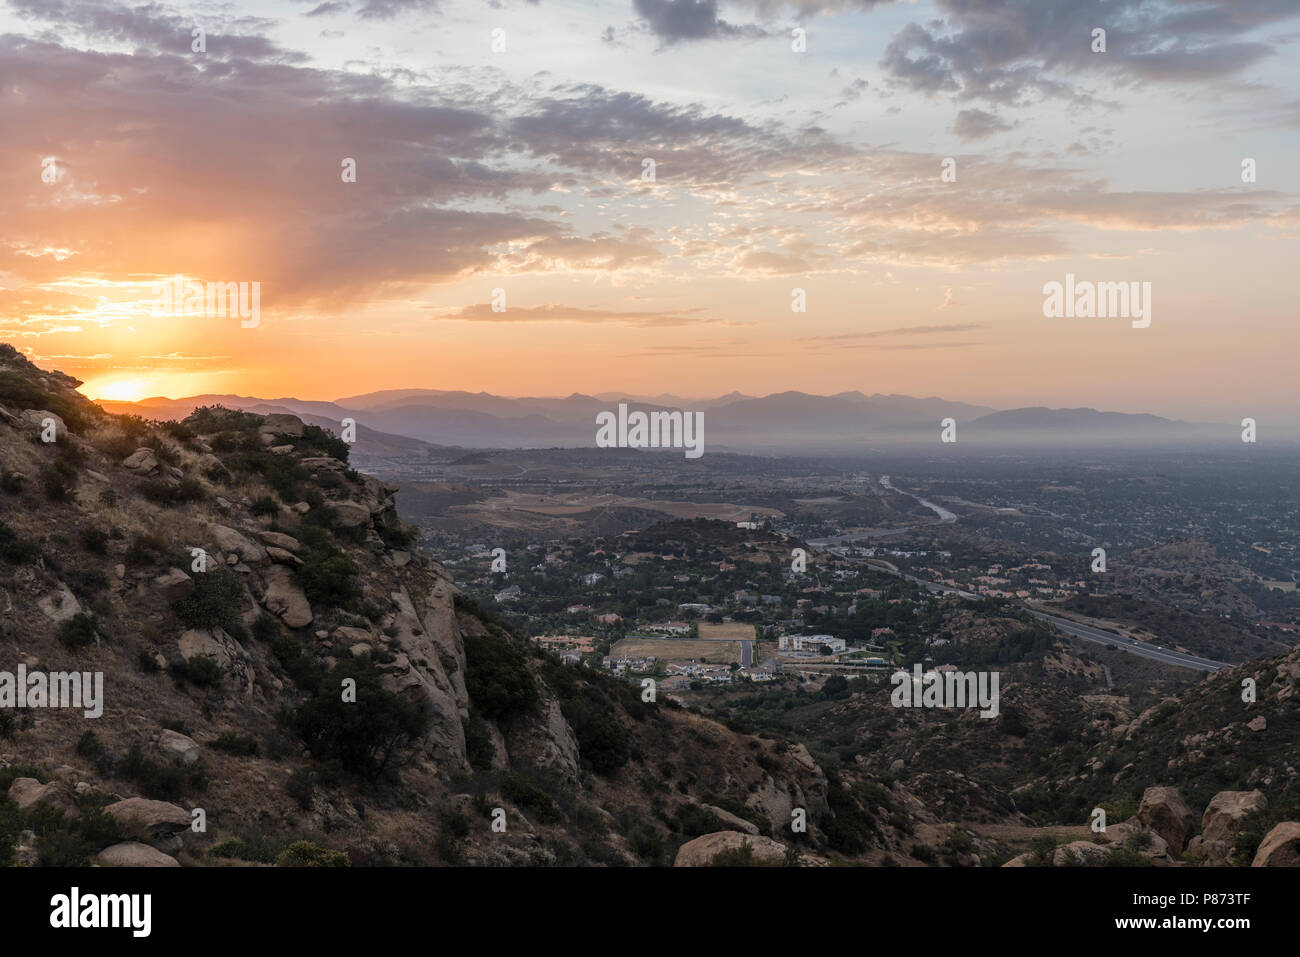 Sunrise view of Porter Ranch in the San Fernando Valley area of Los Angeles, California.  Shot from Rocky Peak Mountain Park. Stock Photo